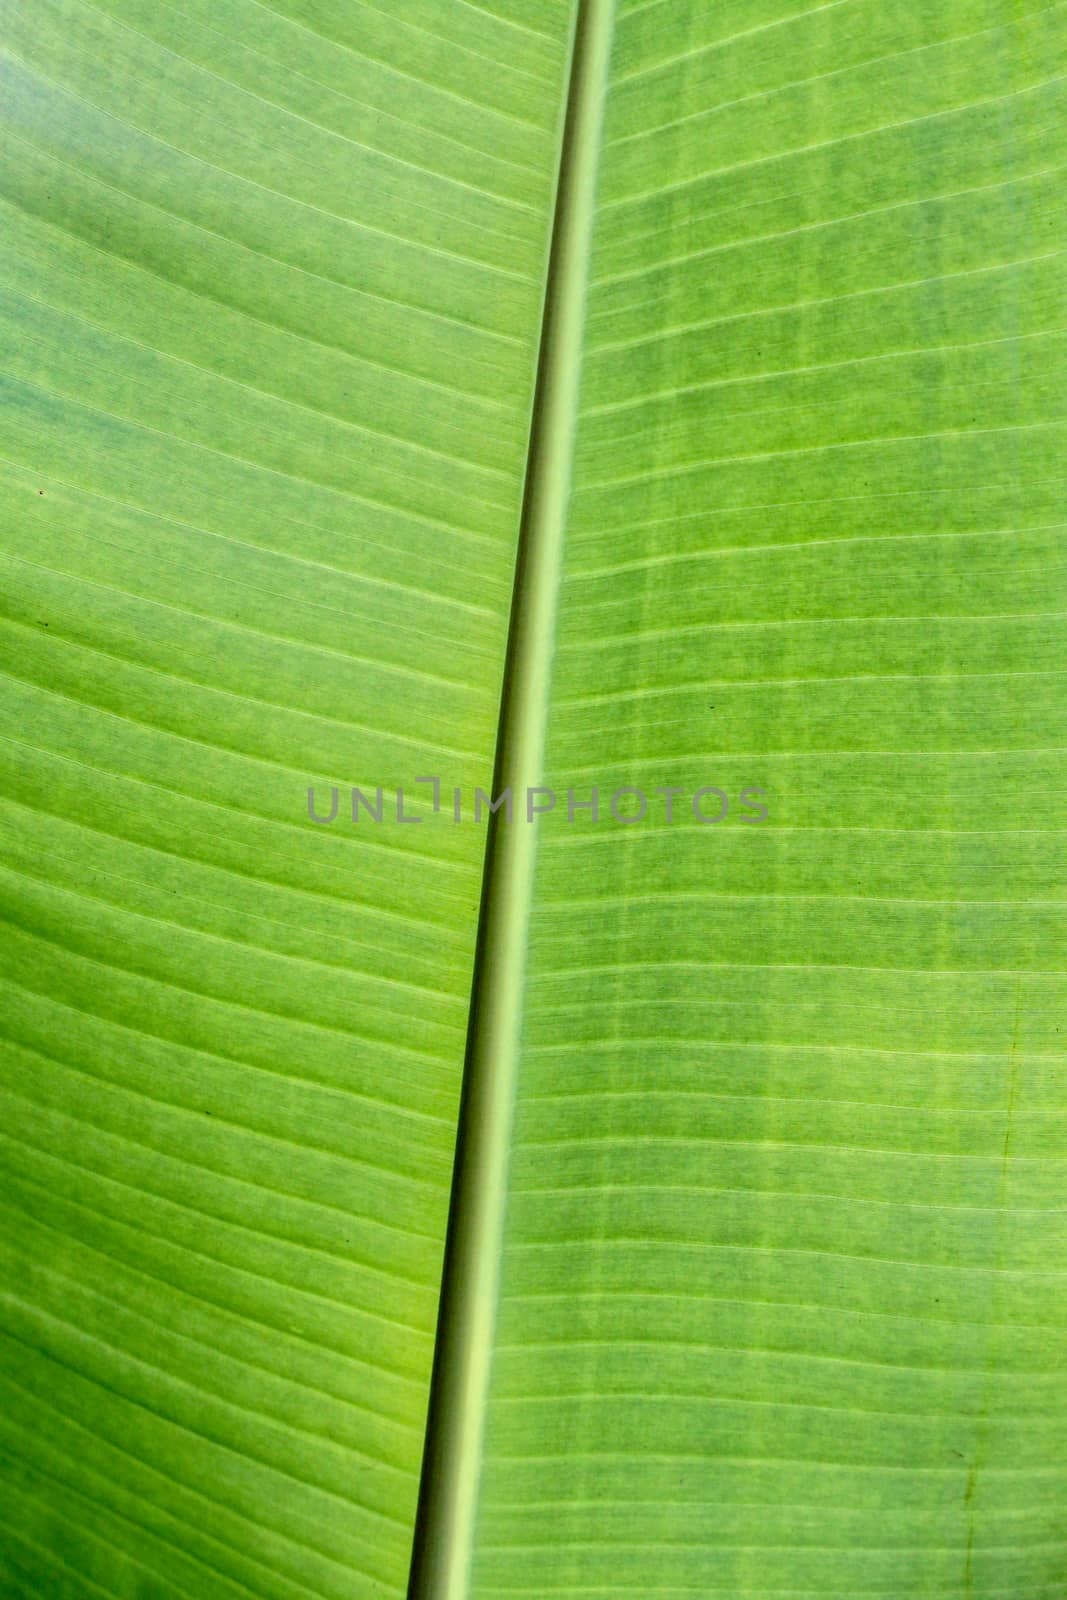 close up banana leaf pattern with outdoor back light. Selective focus